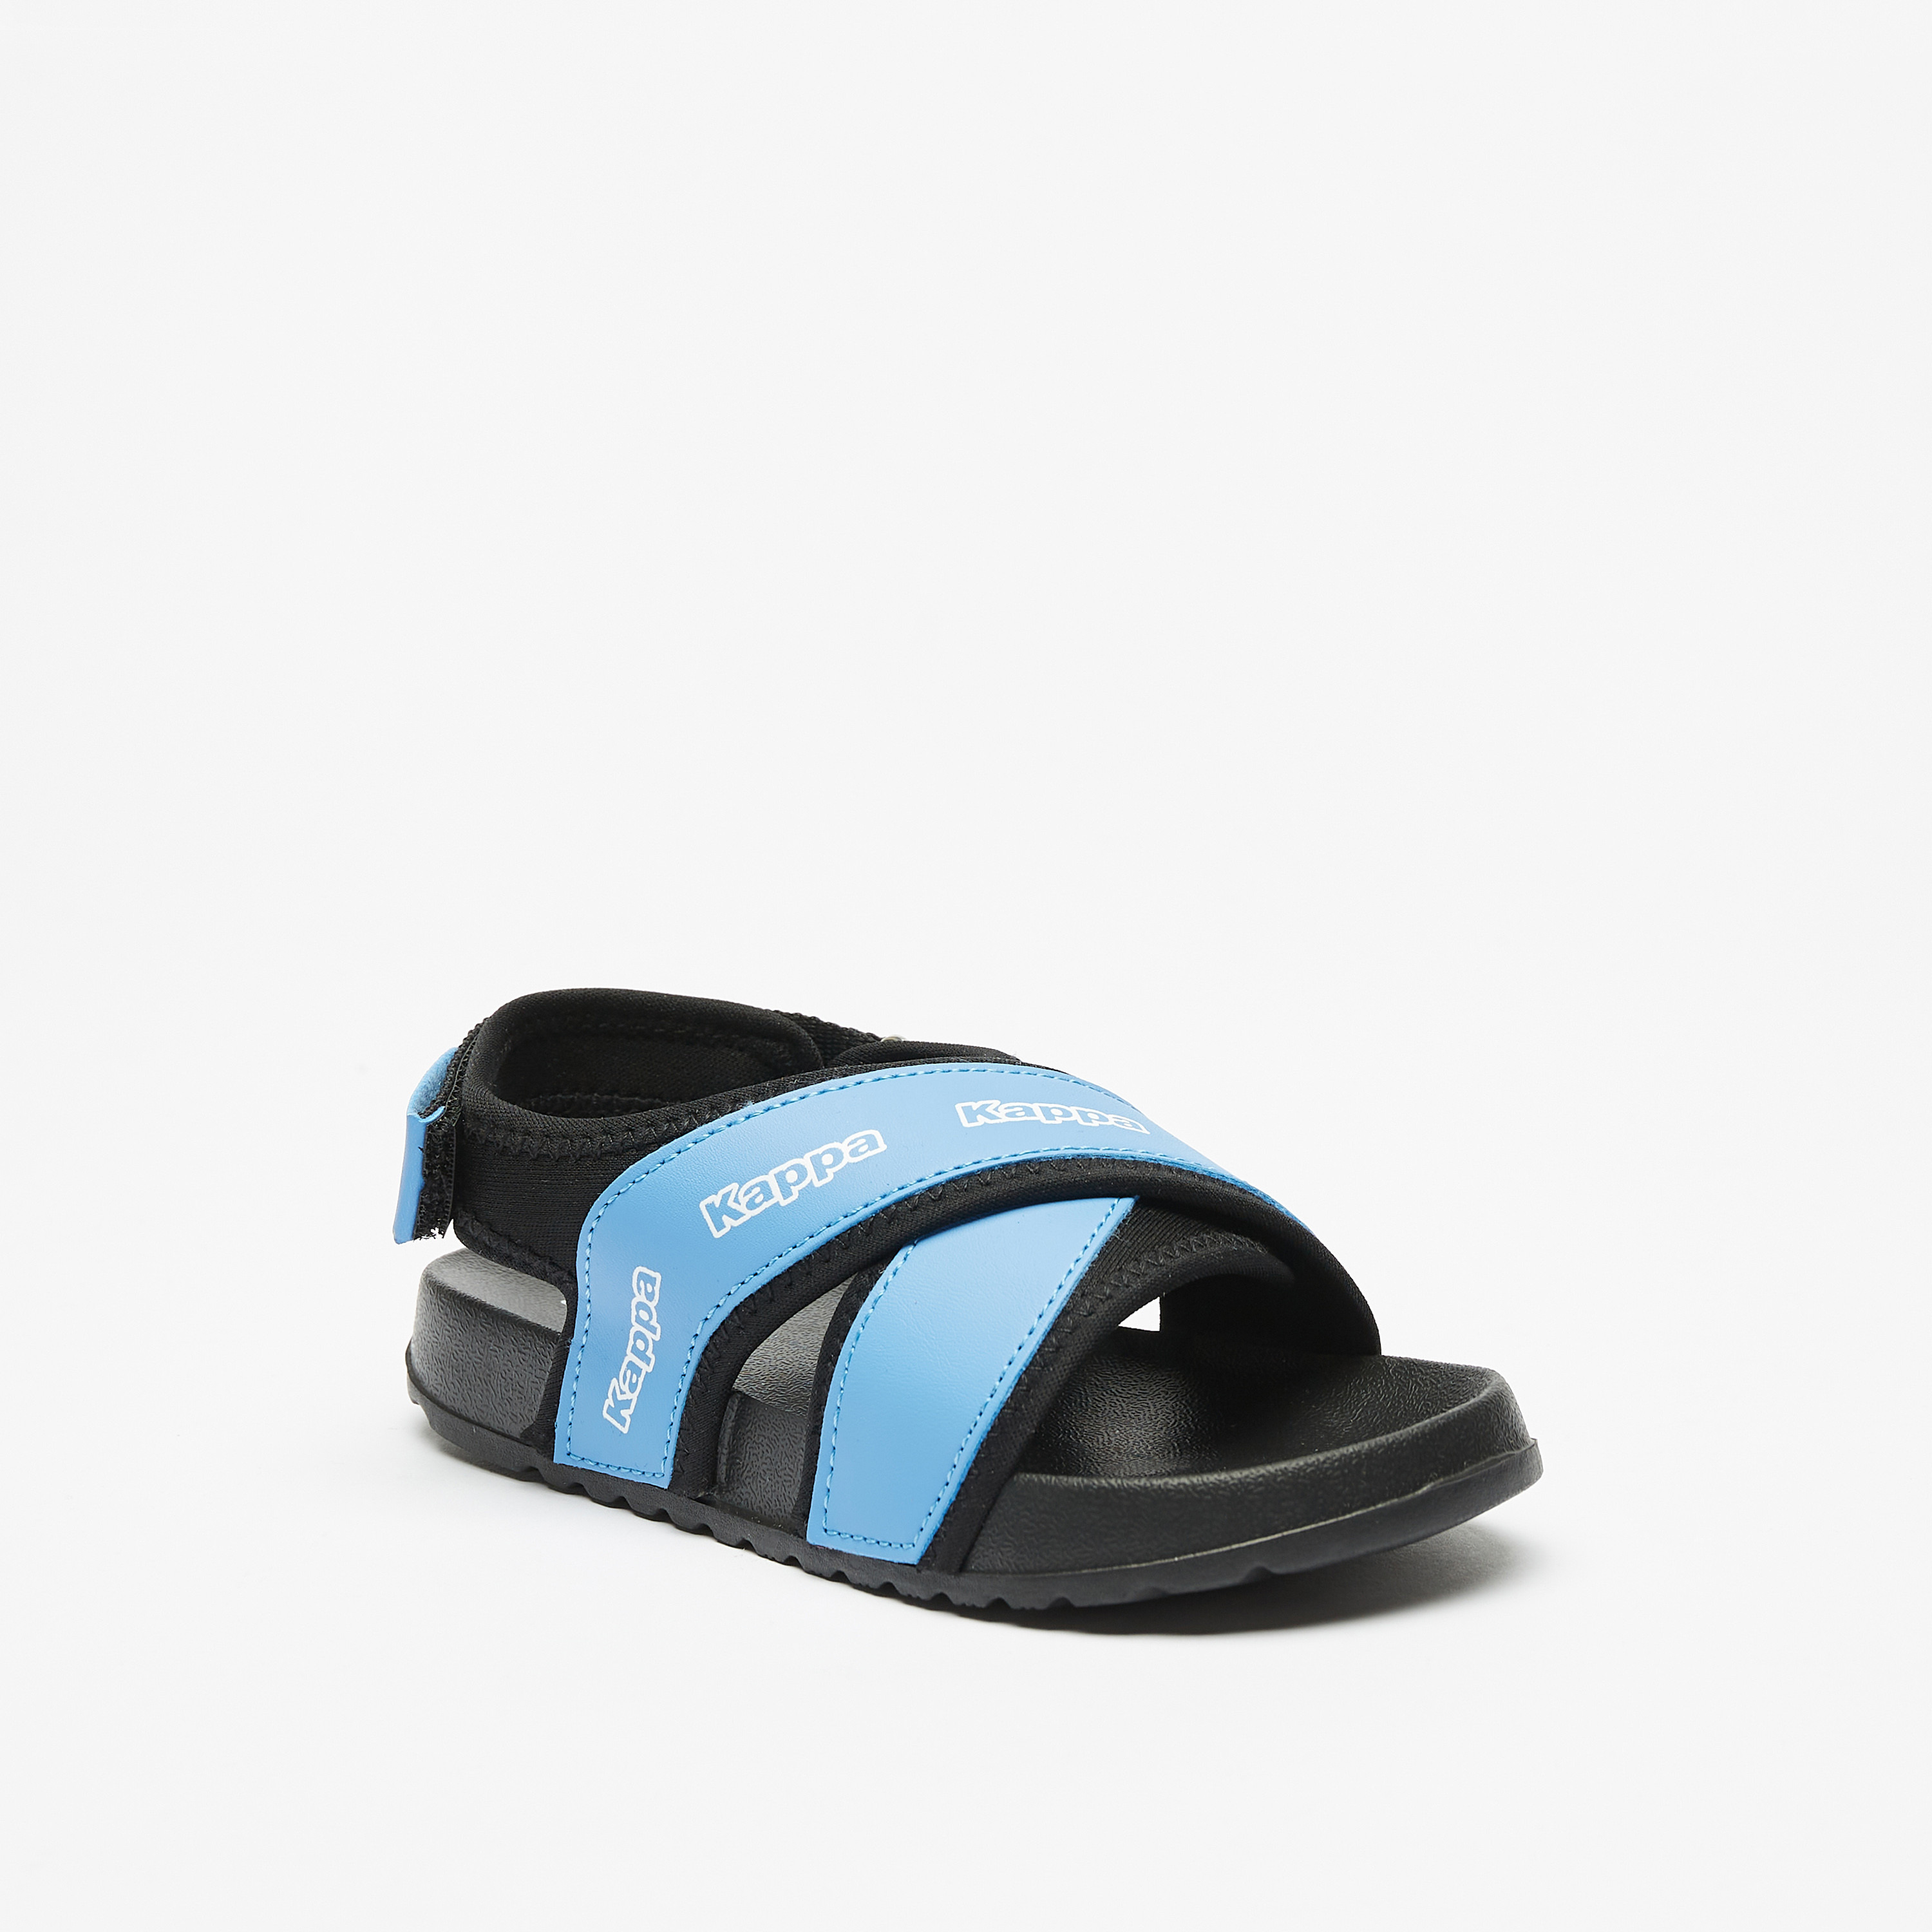 Buy Boy Sandals & Floaters Online at Best Prices in India on Snapdeal